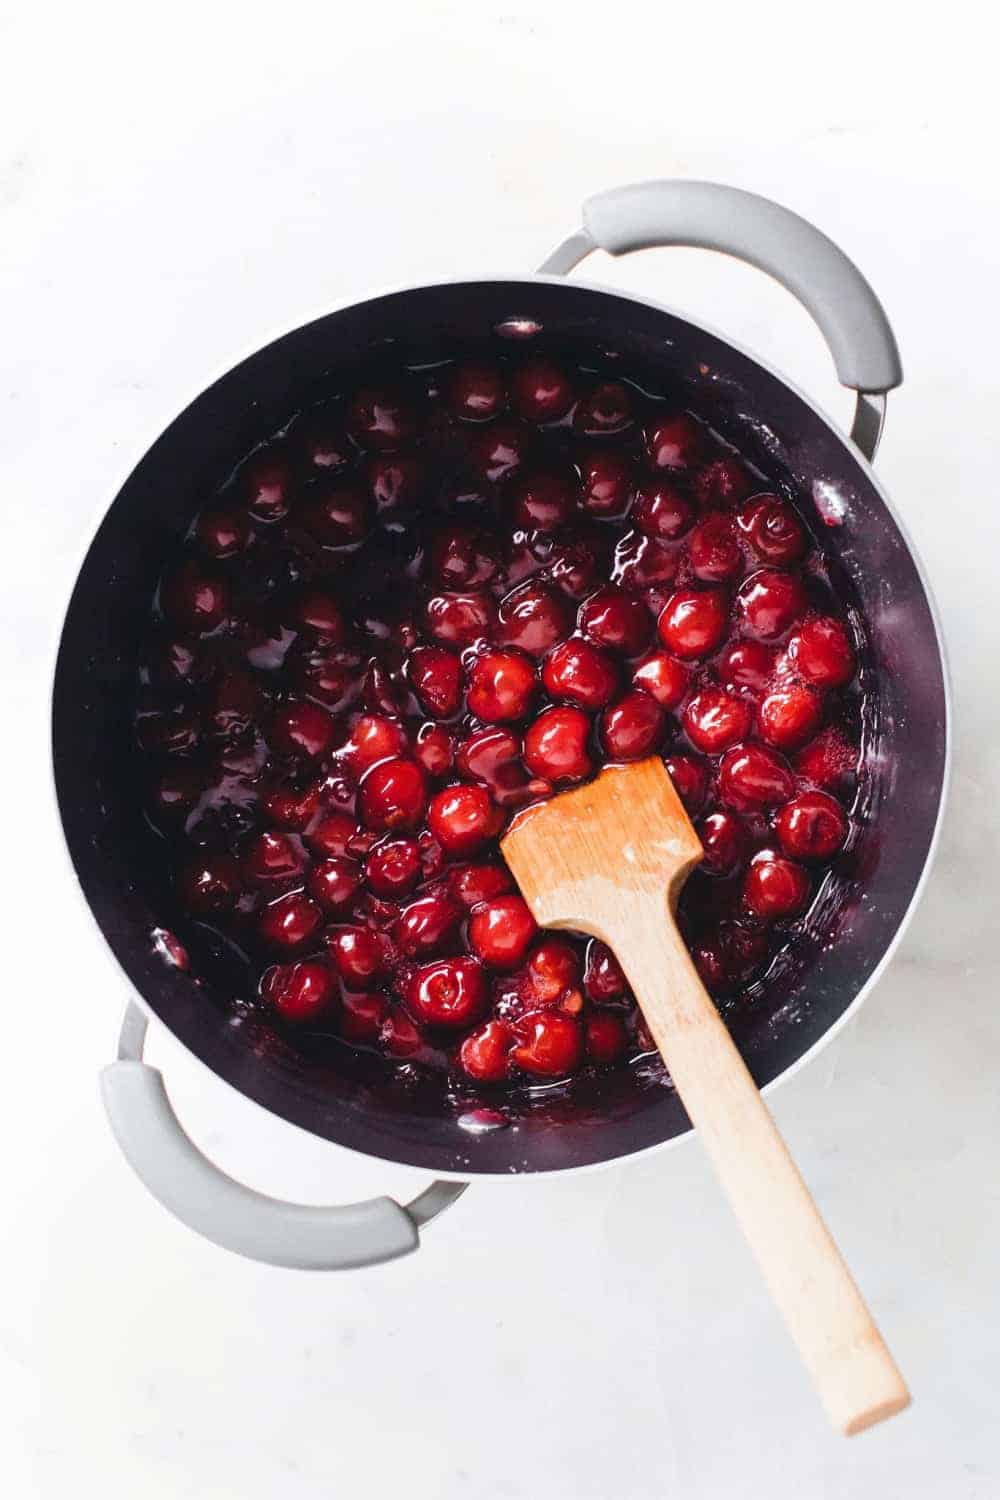 Homemade Cherry Pie Filling comes together in just a few minutes and is so much better than canned!